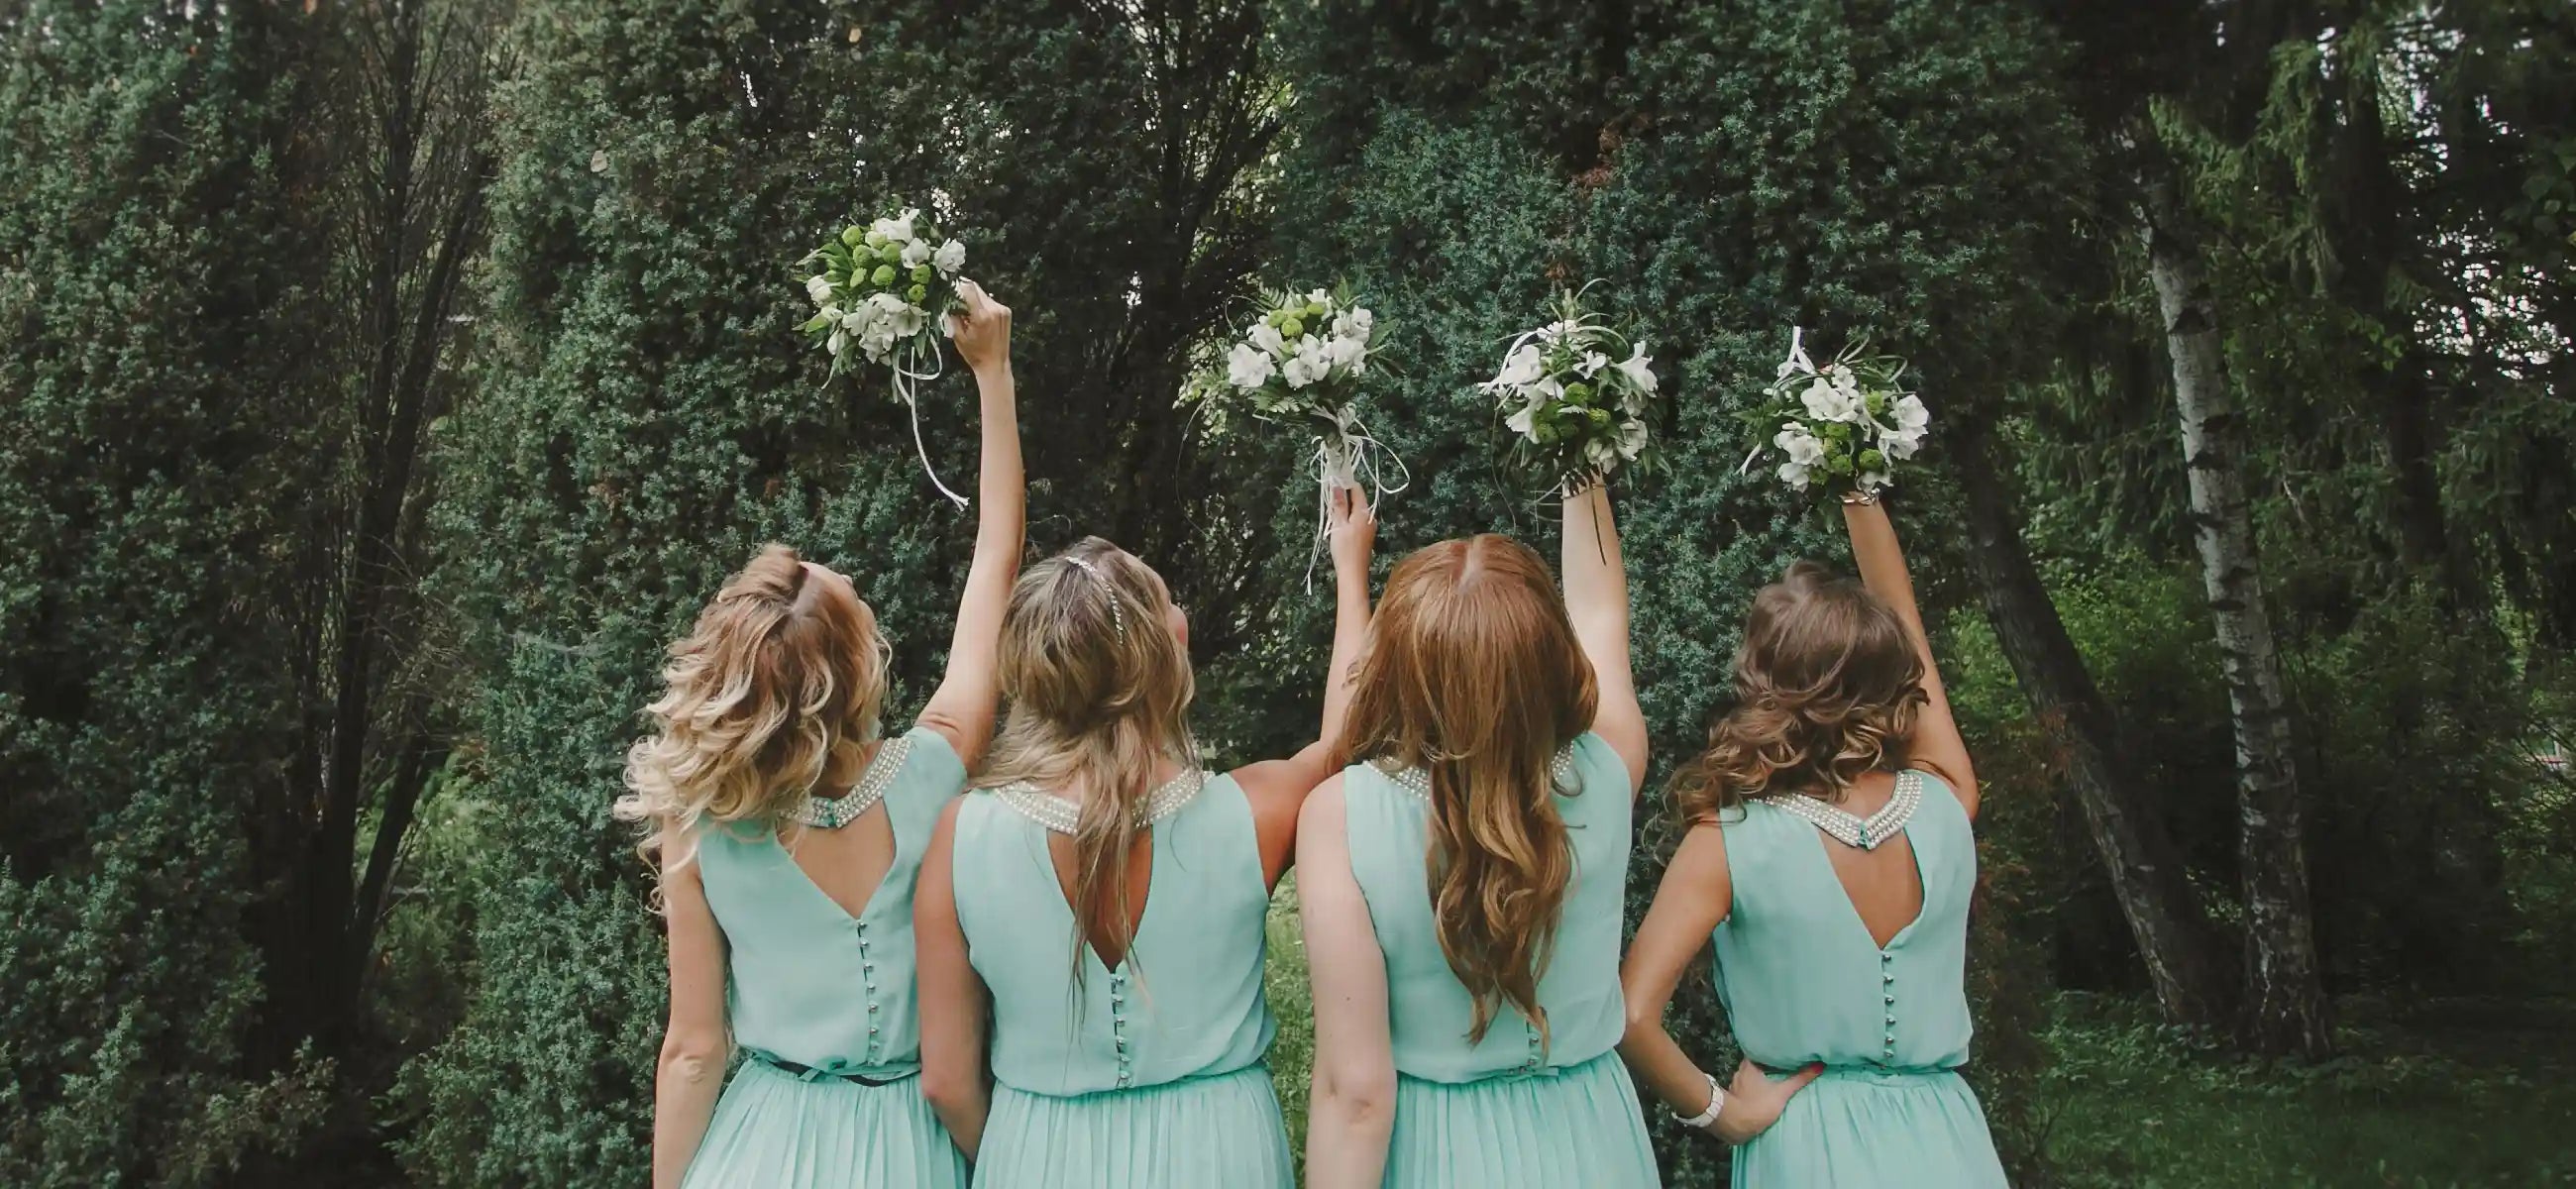 Look your brilliant best with 8 bridesmaid hairstyles for your bestie's big day